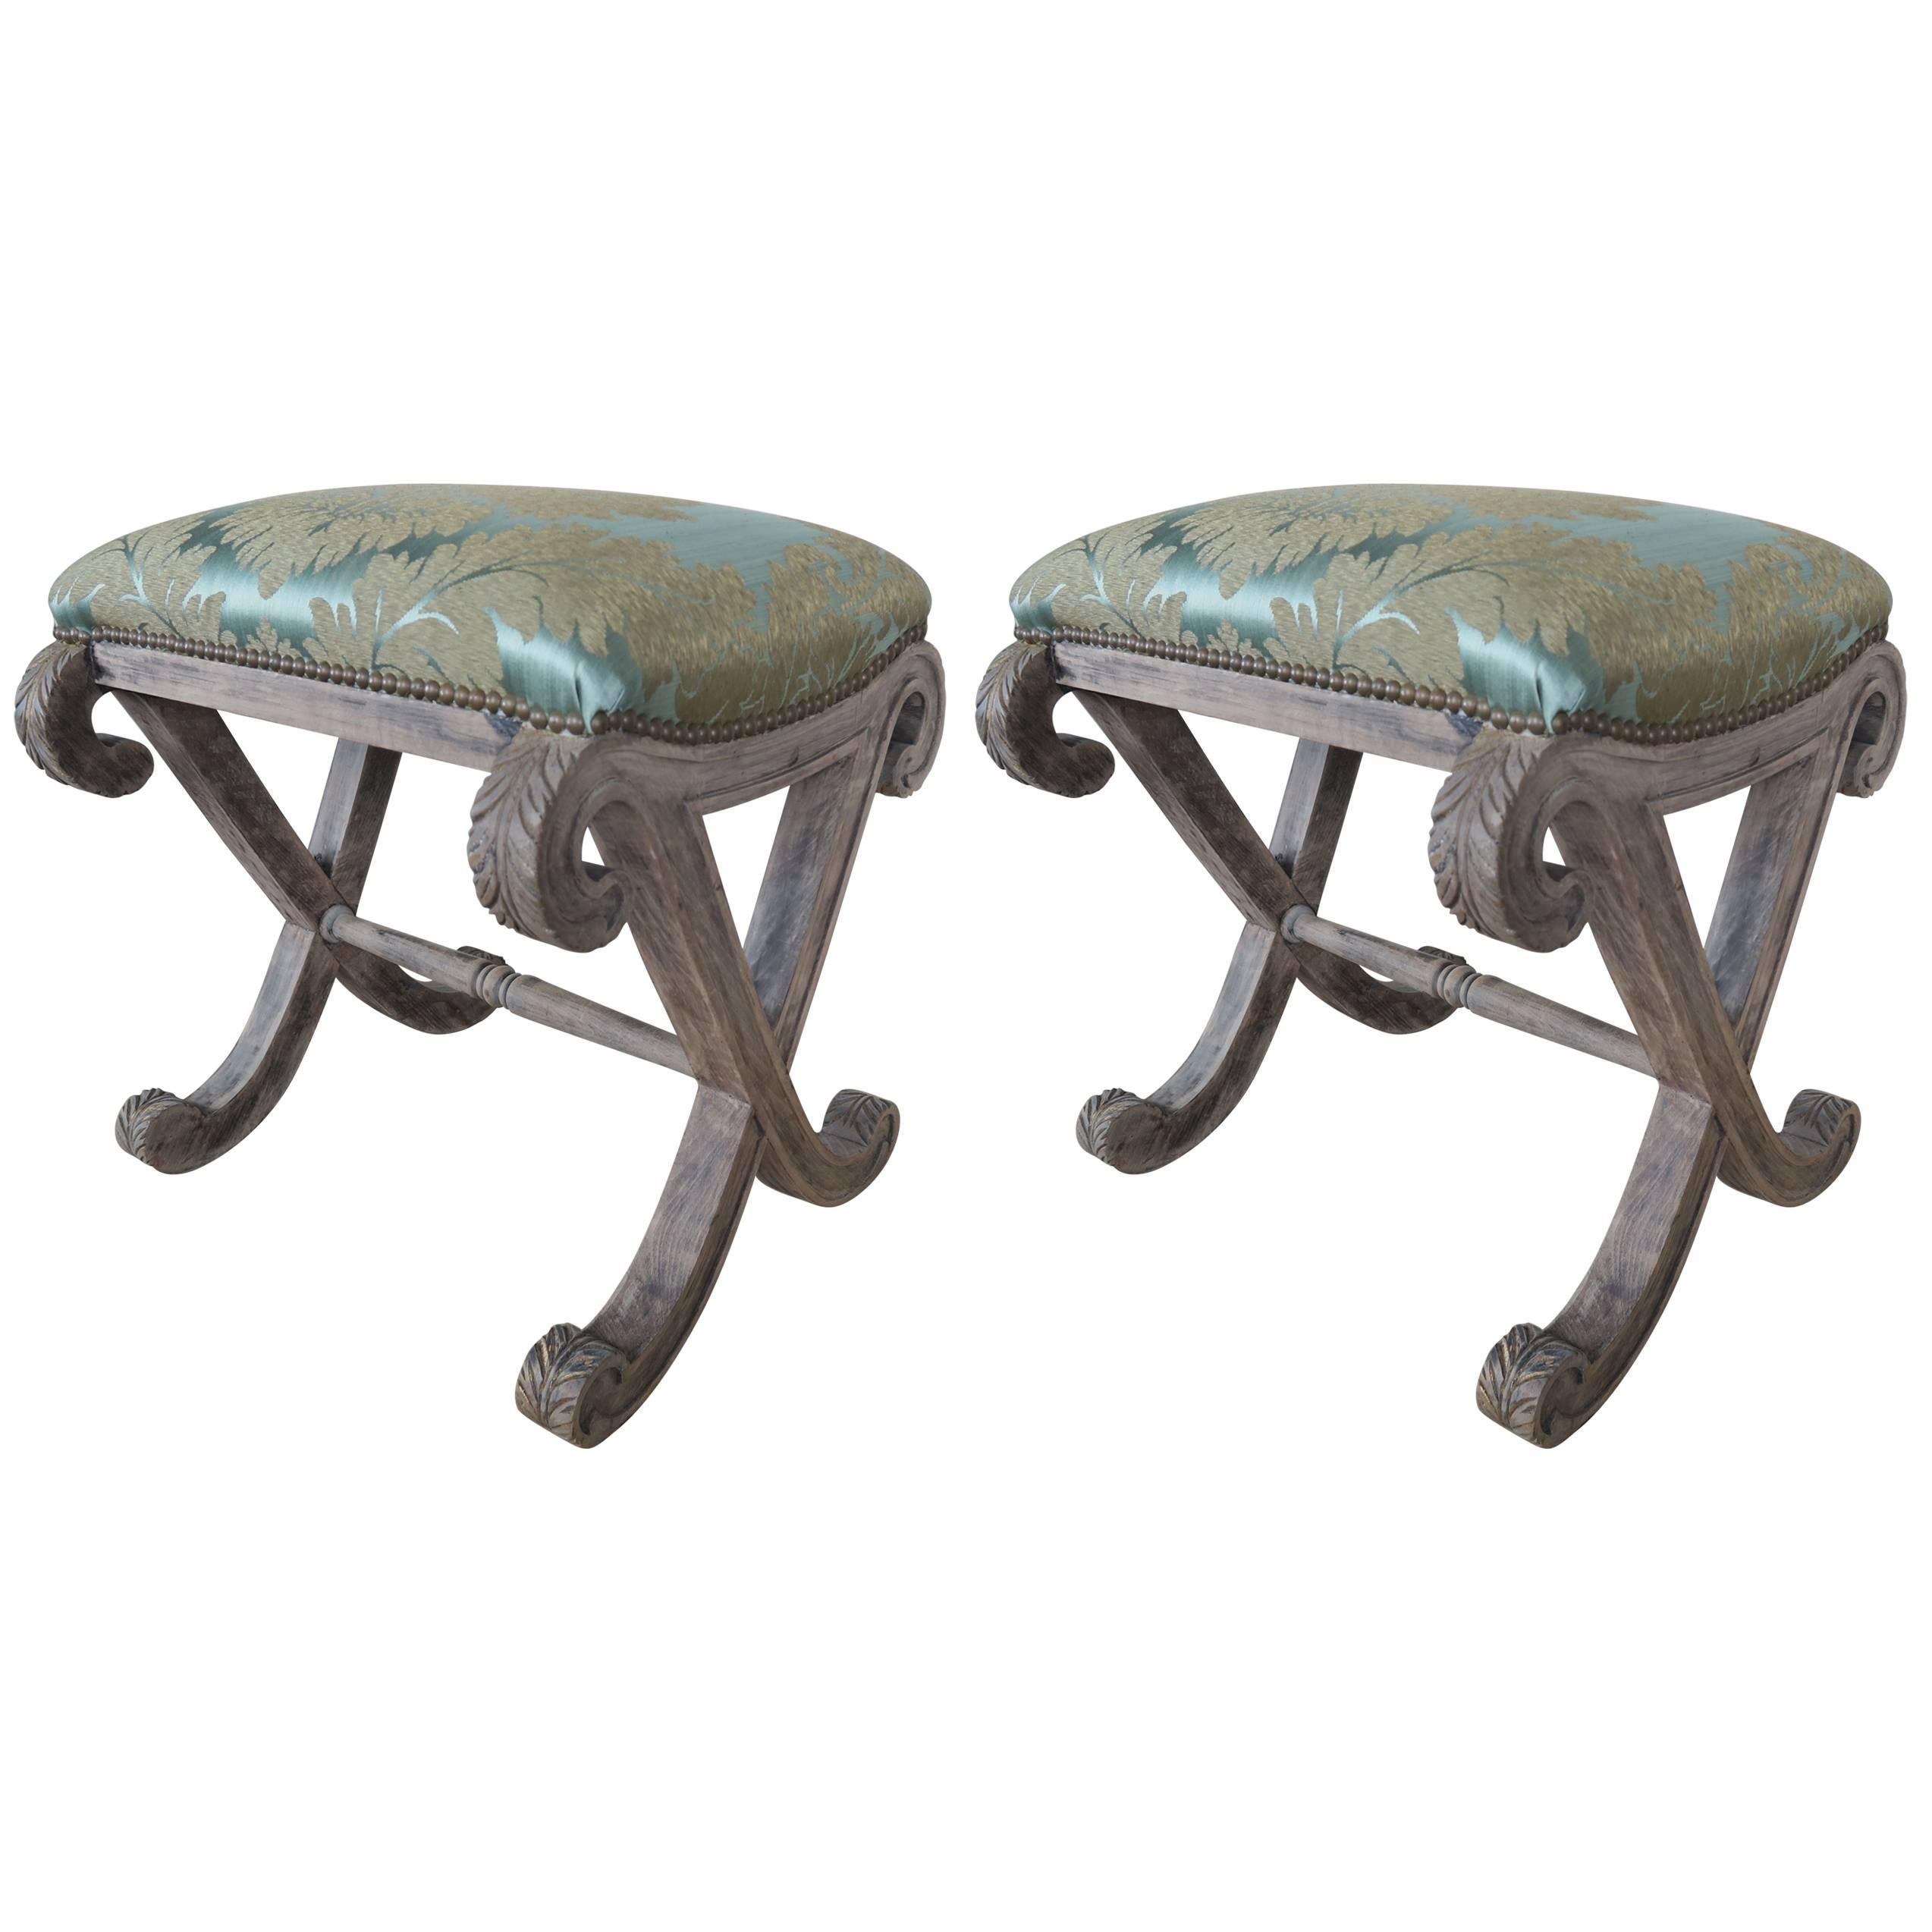 Italian Neoclassical Style "X" Benches, Pair